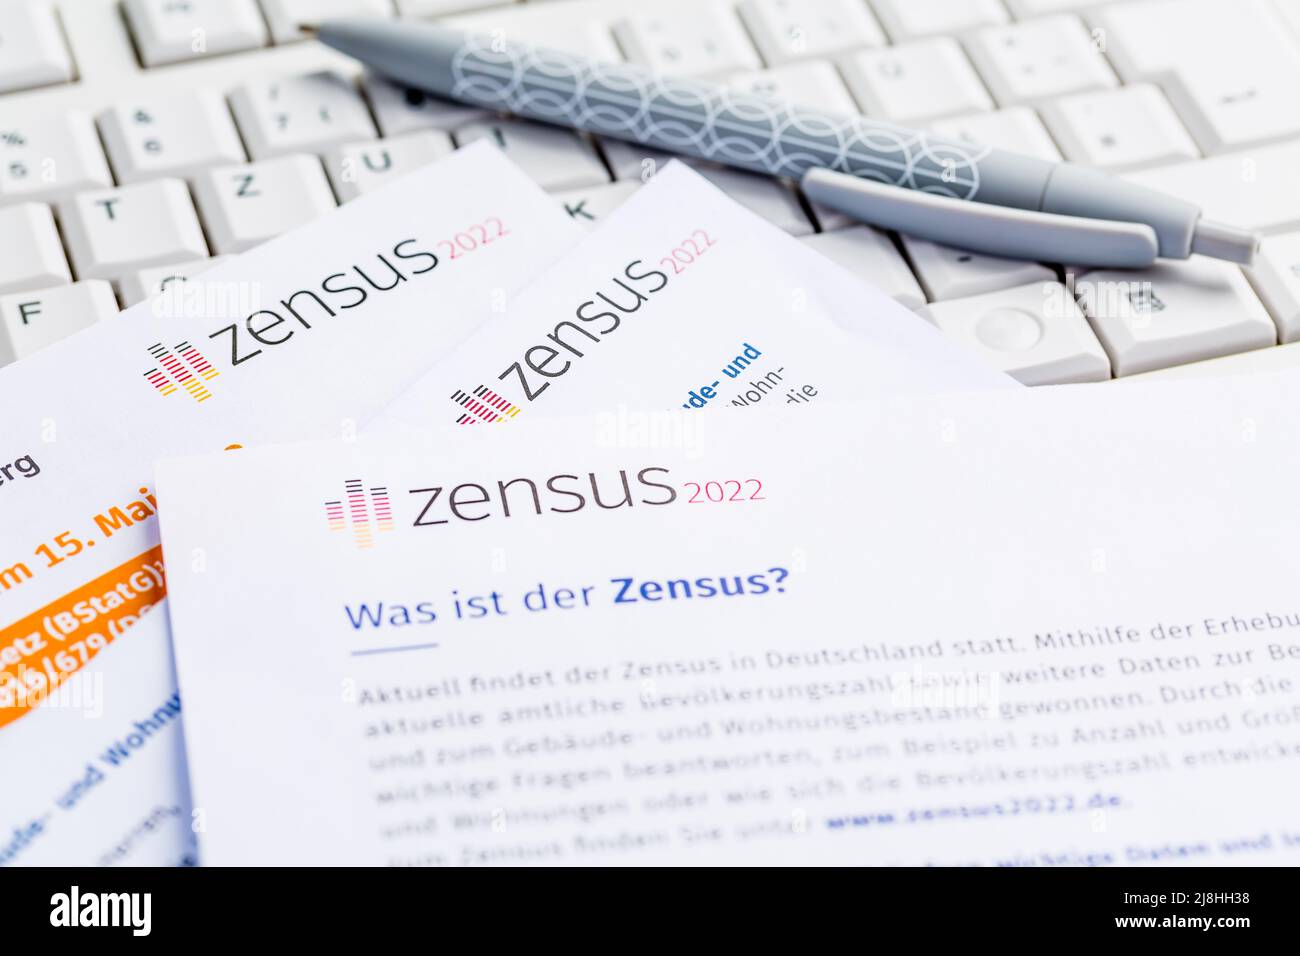 Census 2022 in Germany: official government survey for census (population, building and household)  with keyboard for online survey Stock Photo